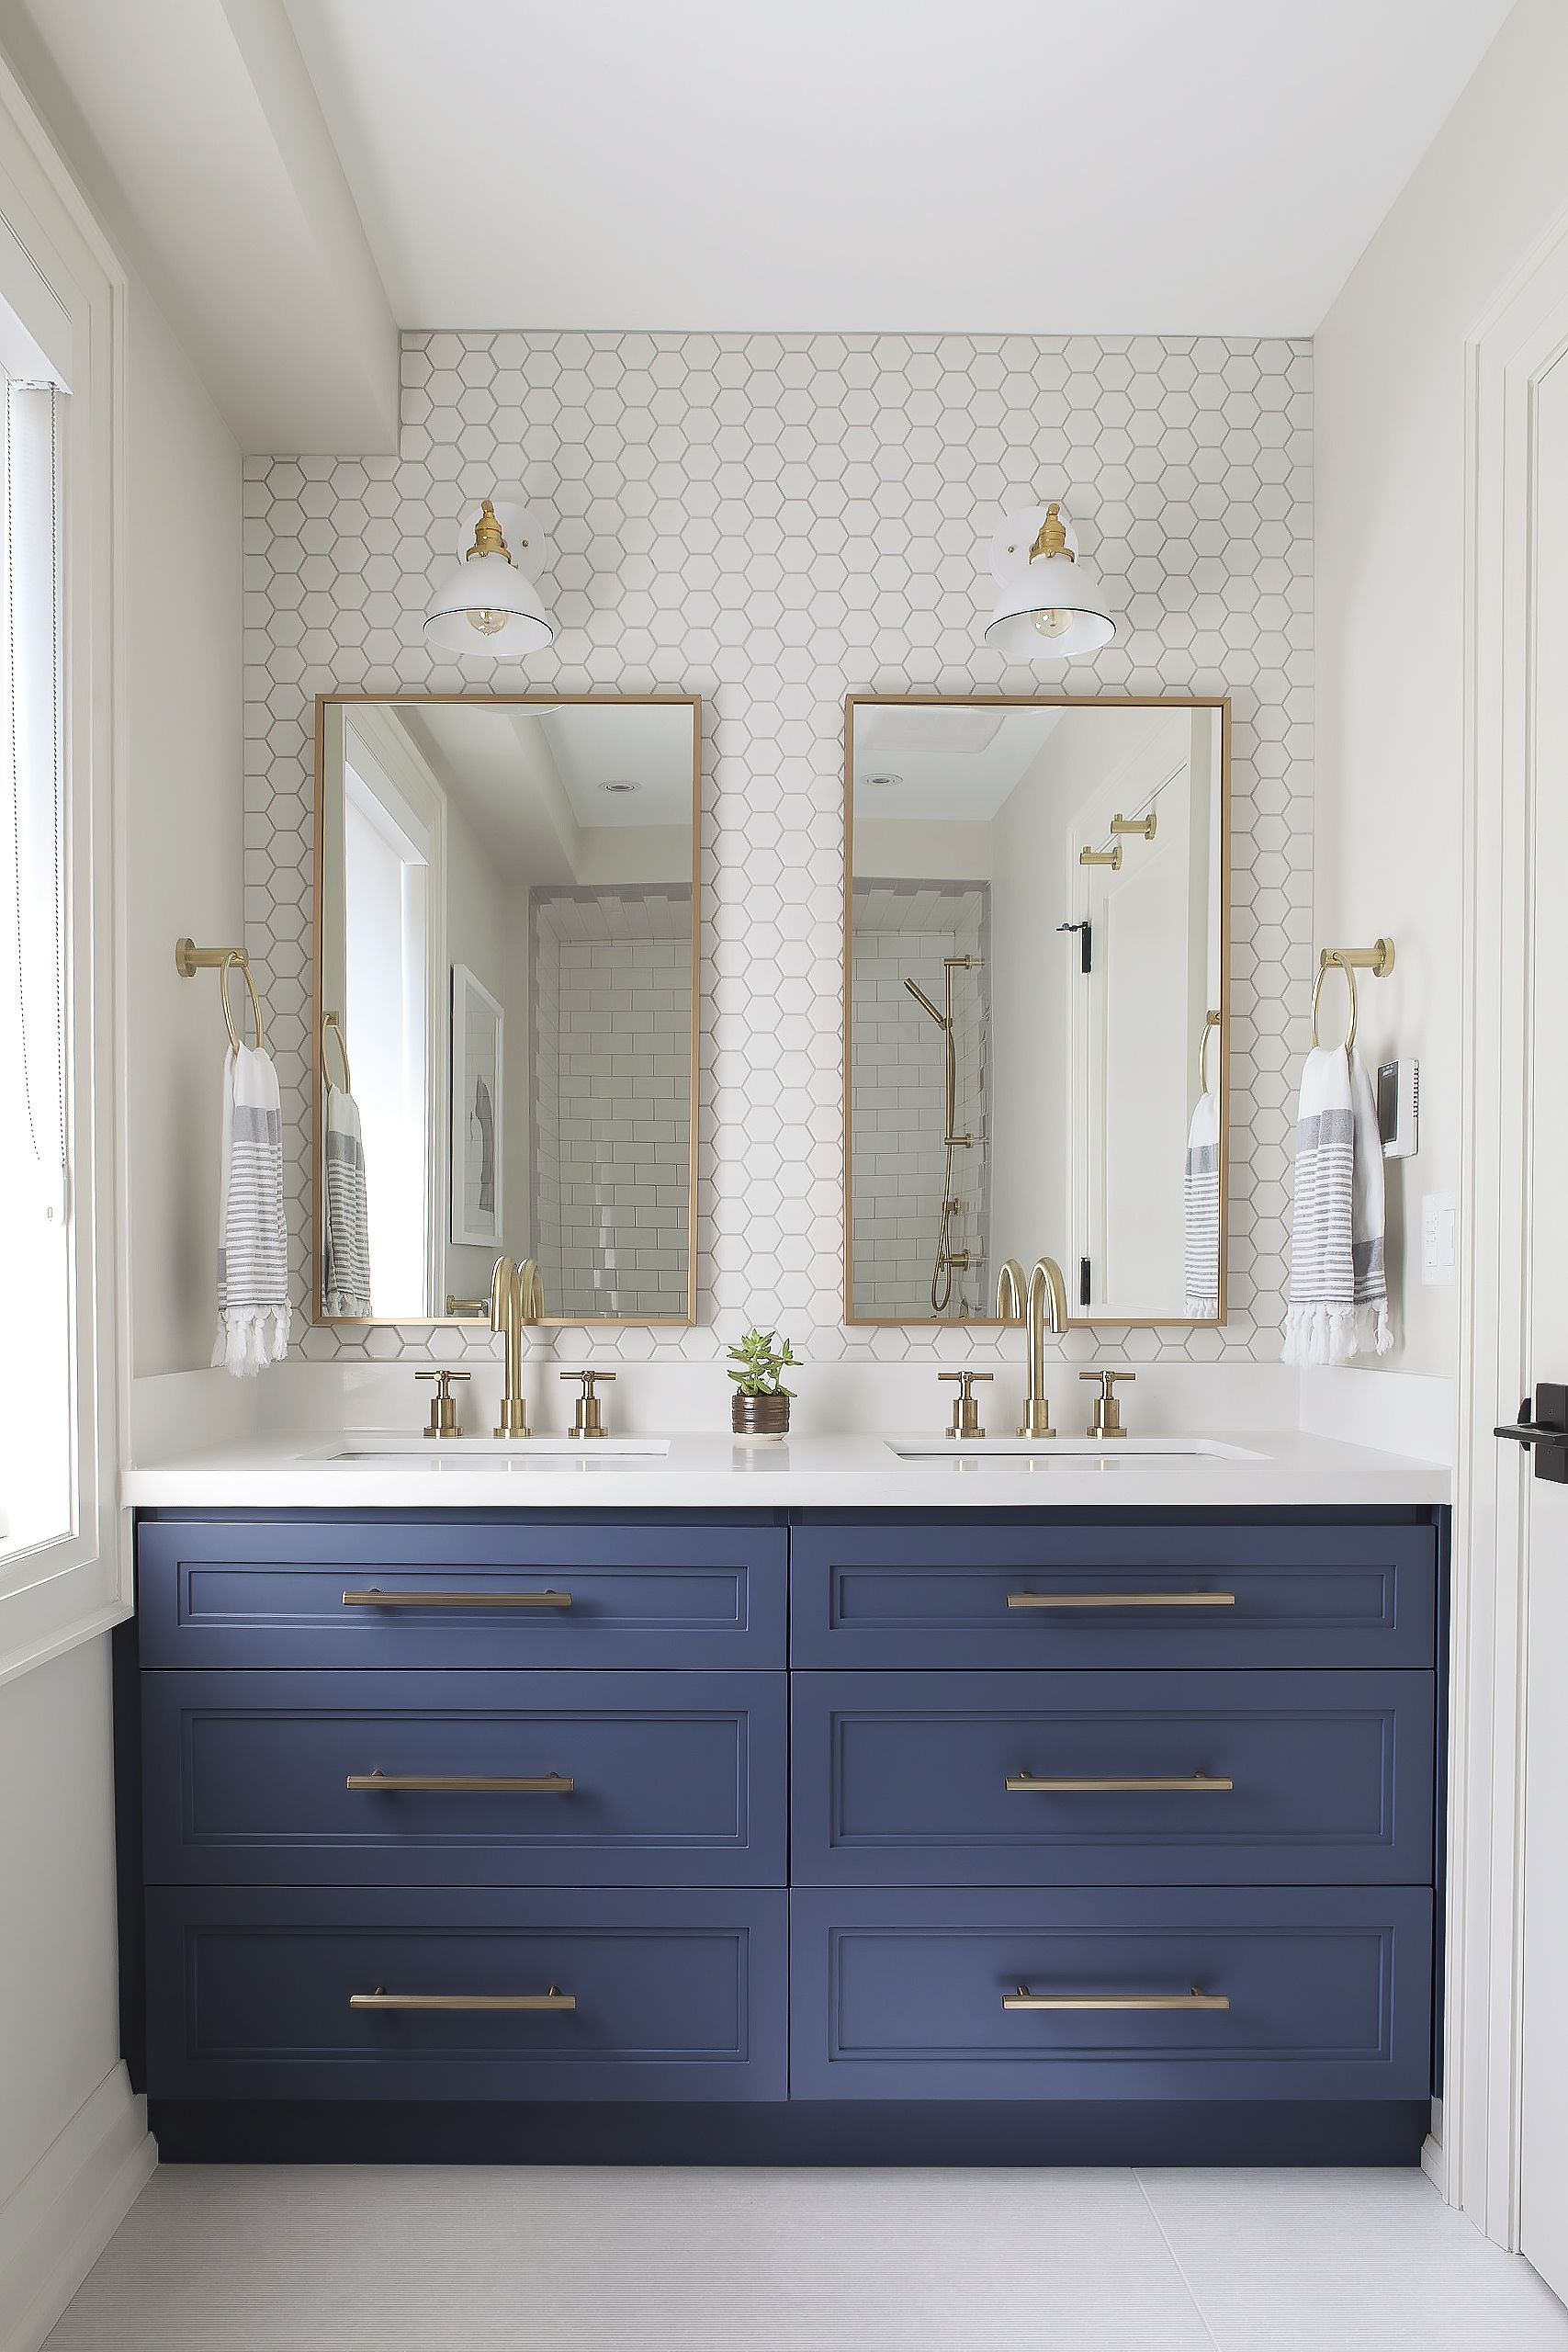 Deep blue painted cabinets in an otherwise all white bathroom. I also love the h...